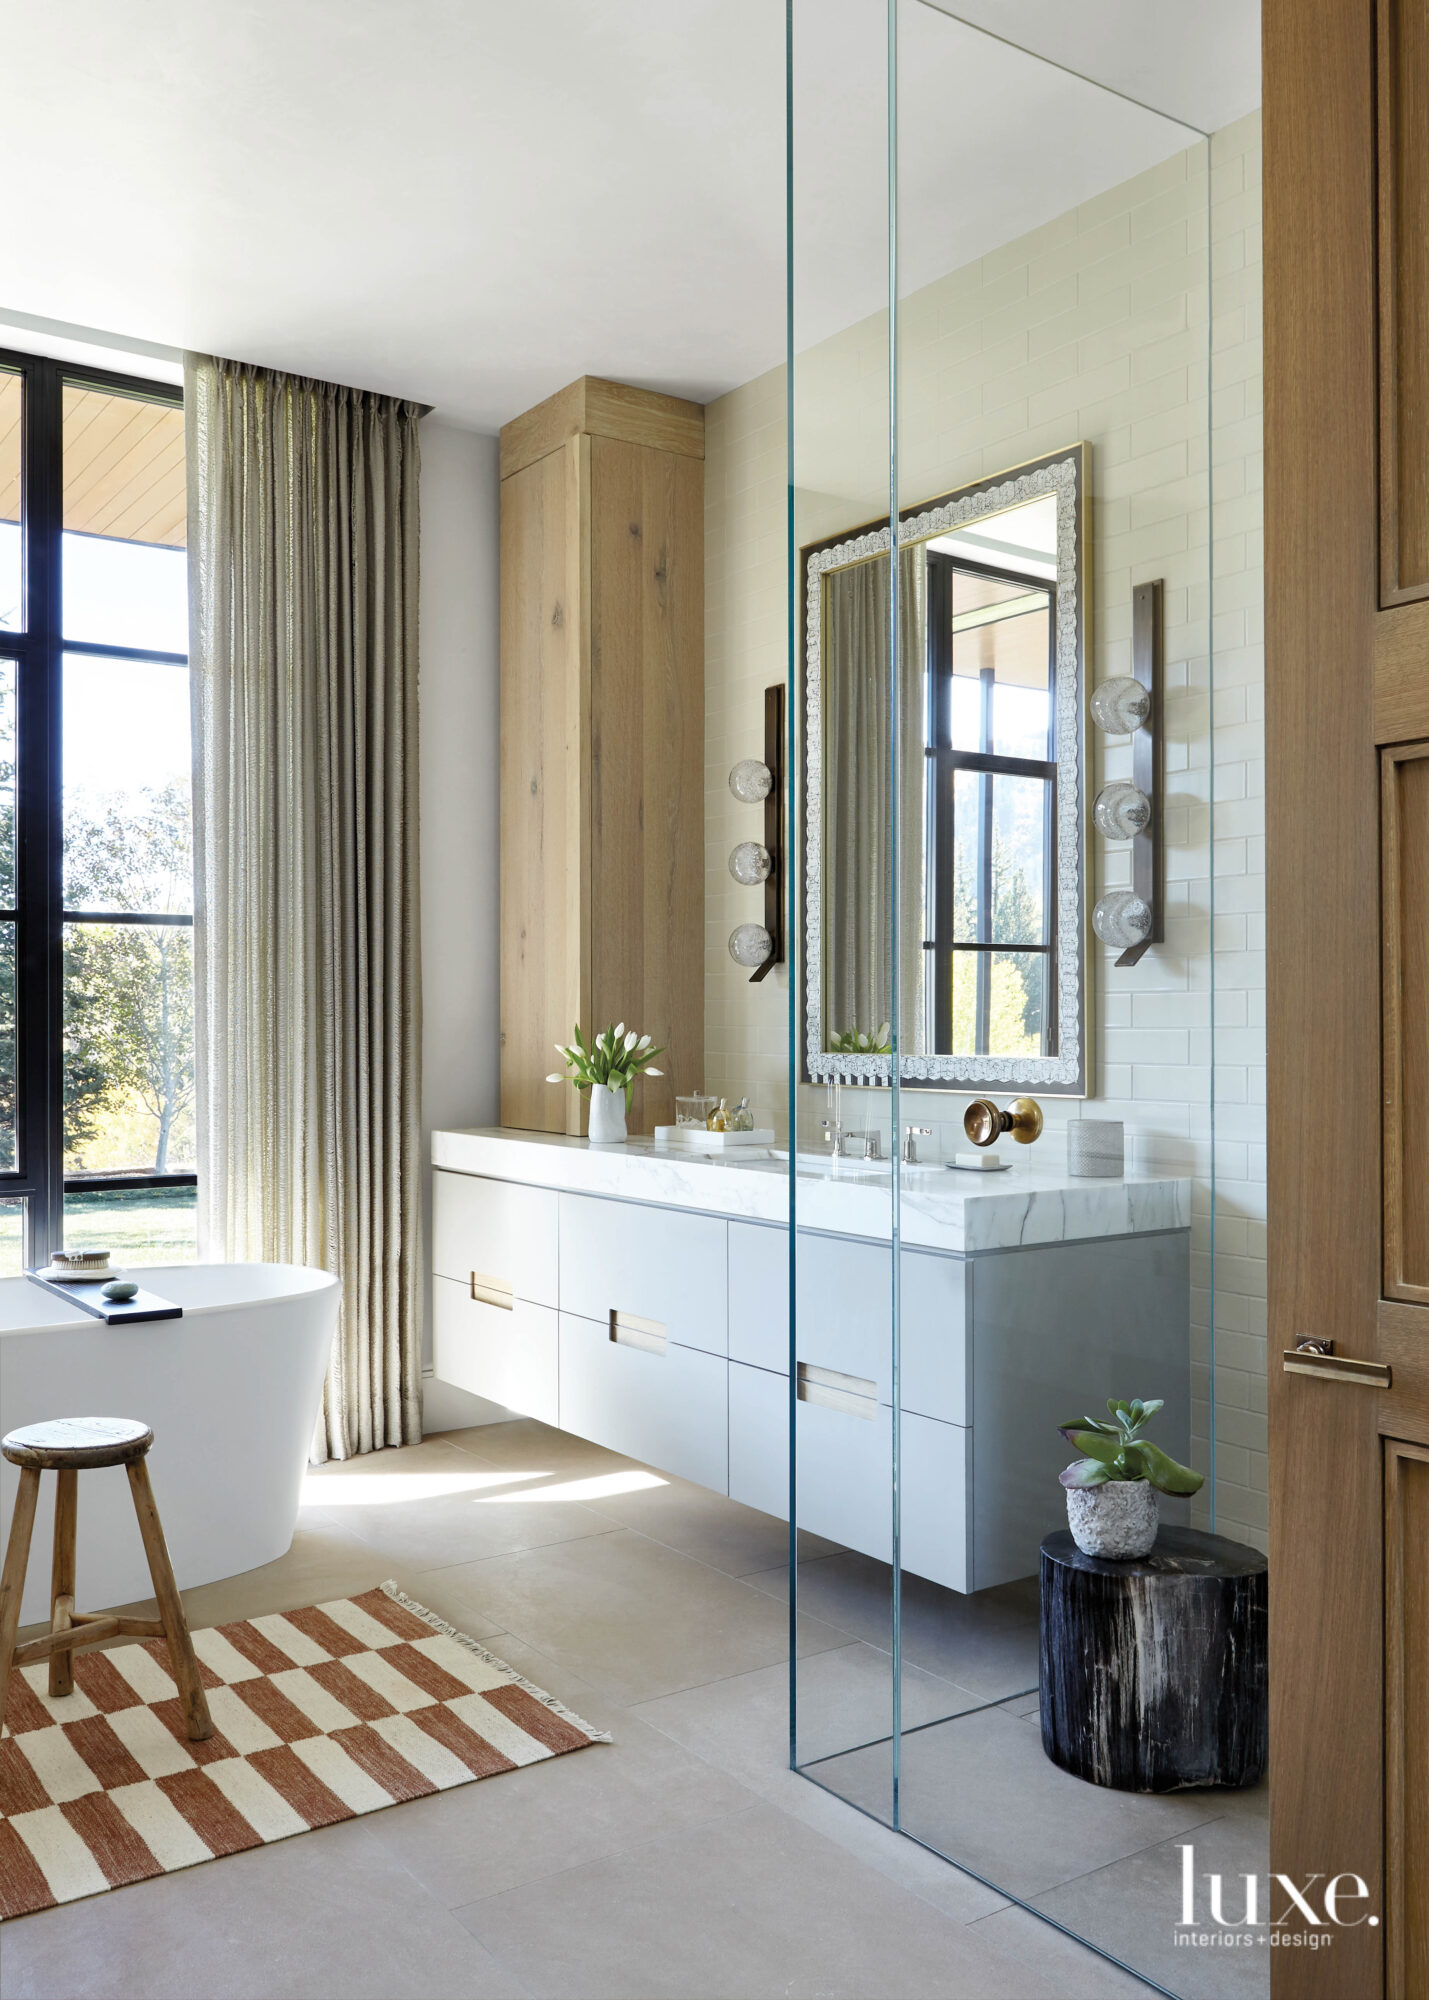 The primary bathroom has a large, glass-sided shower and a floating vanity.